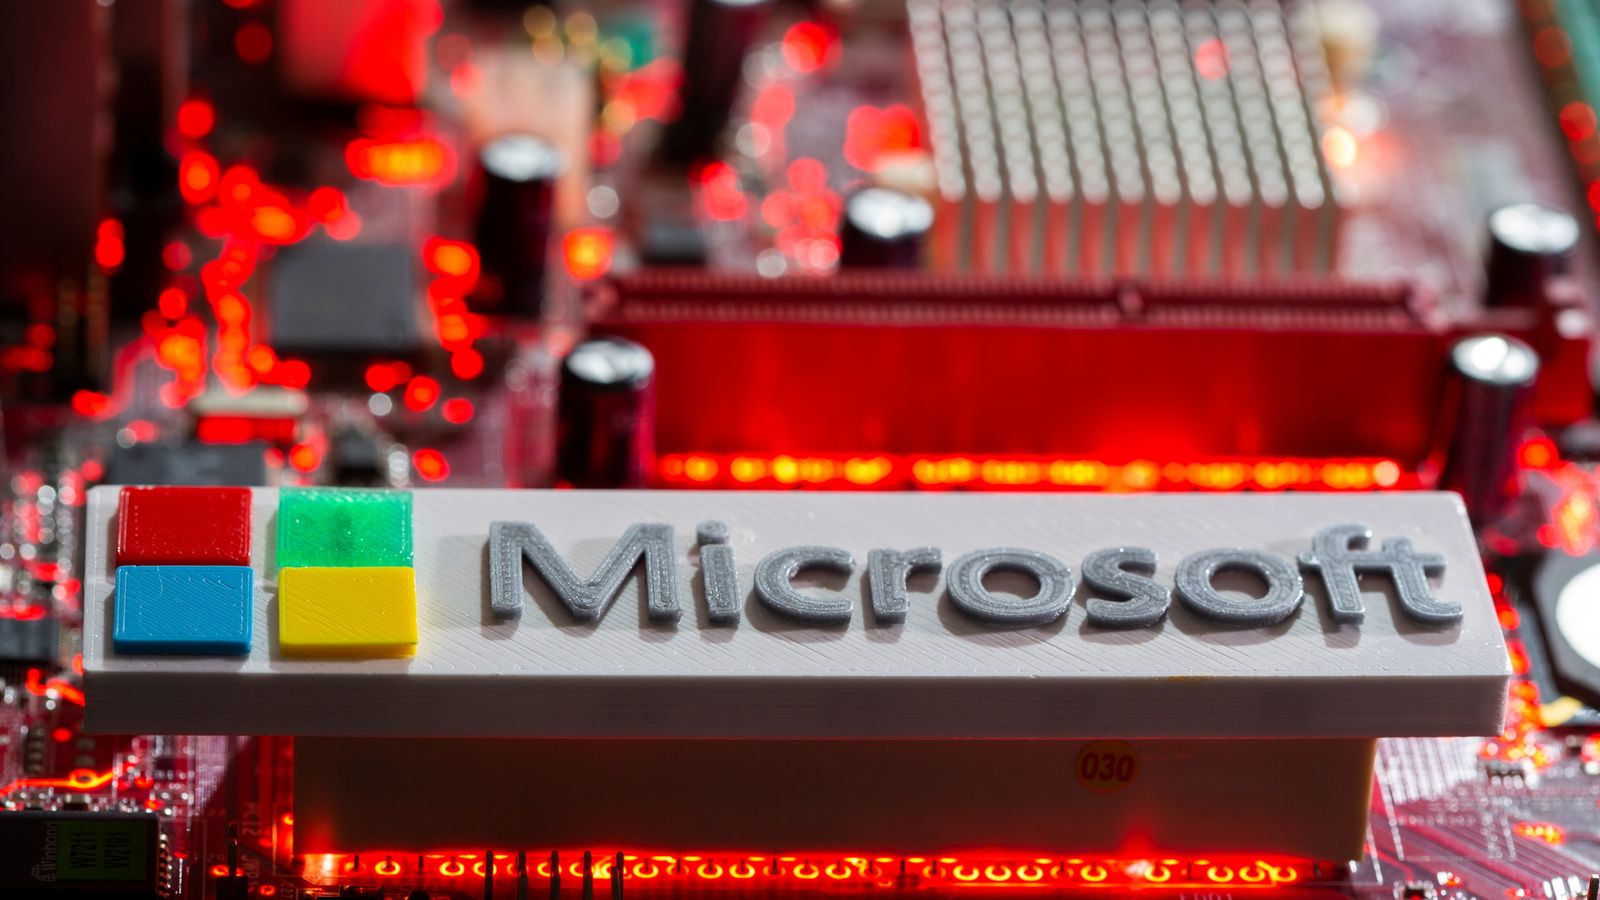 German cybersecurity officials looking into ‘culprits’ behind Microsoft outage | World News